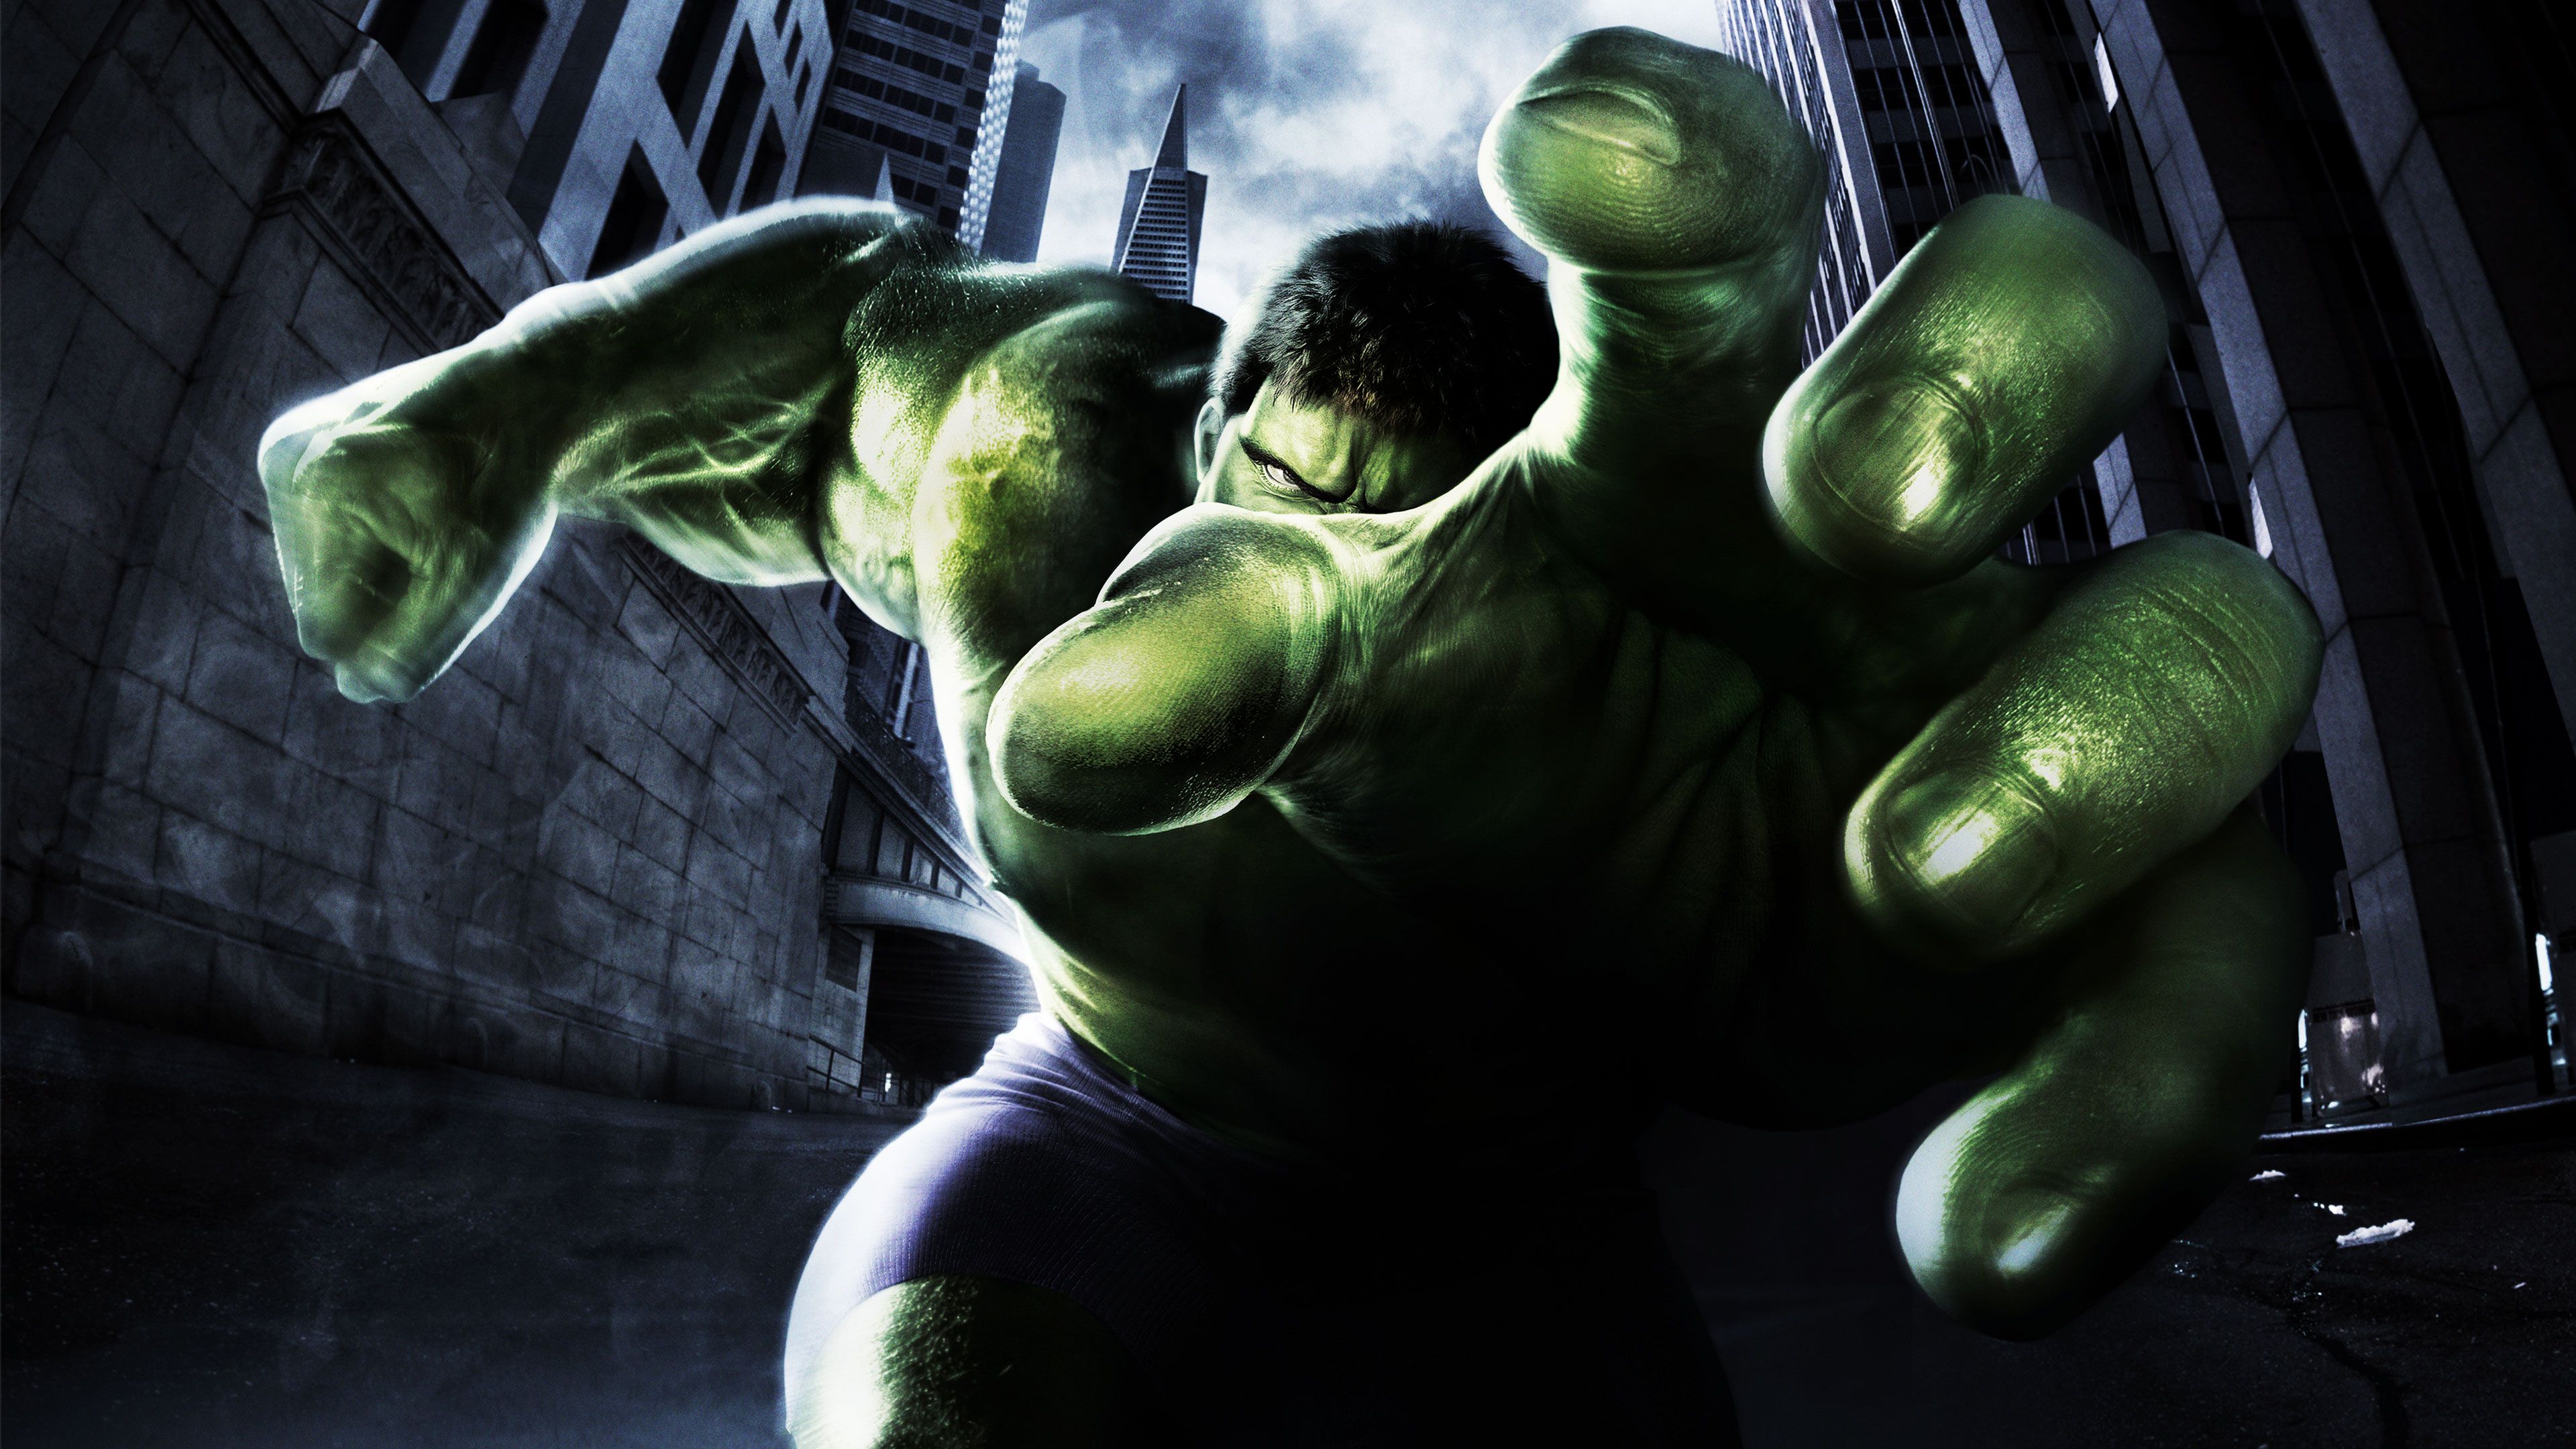 alexis downing recommends Hulk Full Movie Download